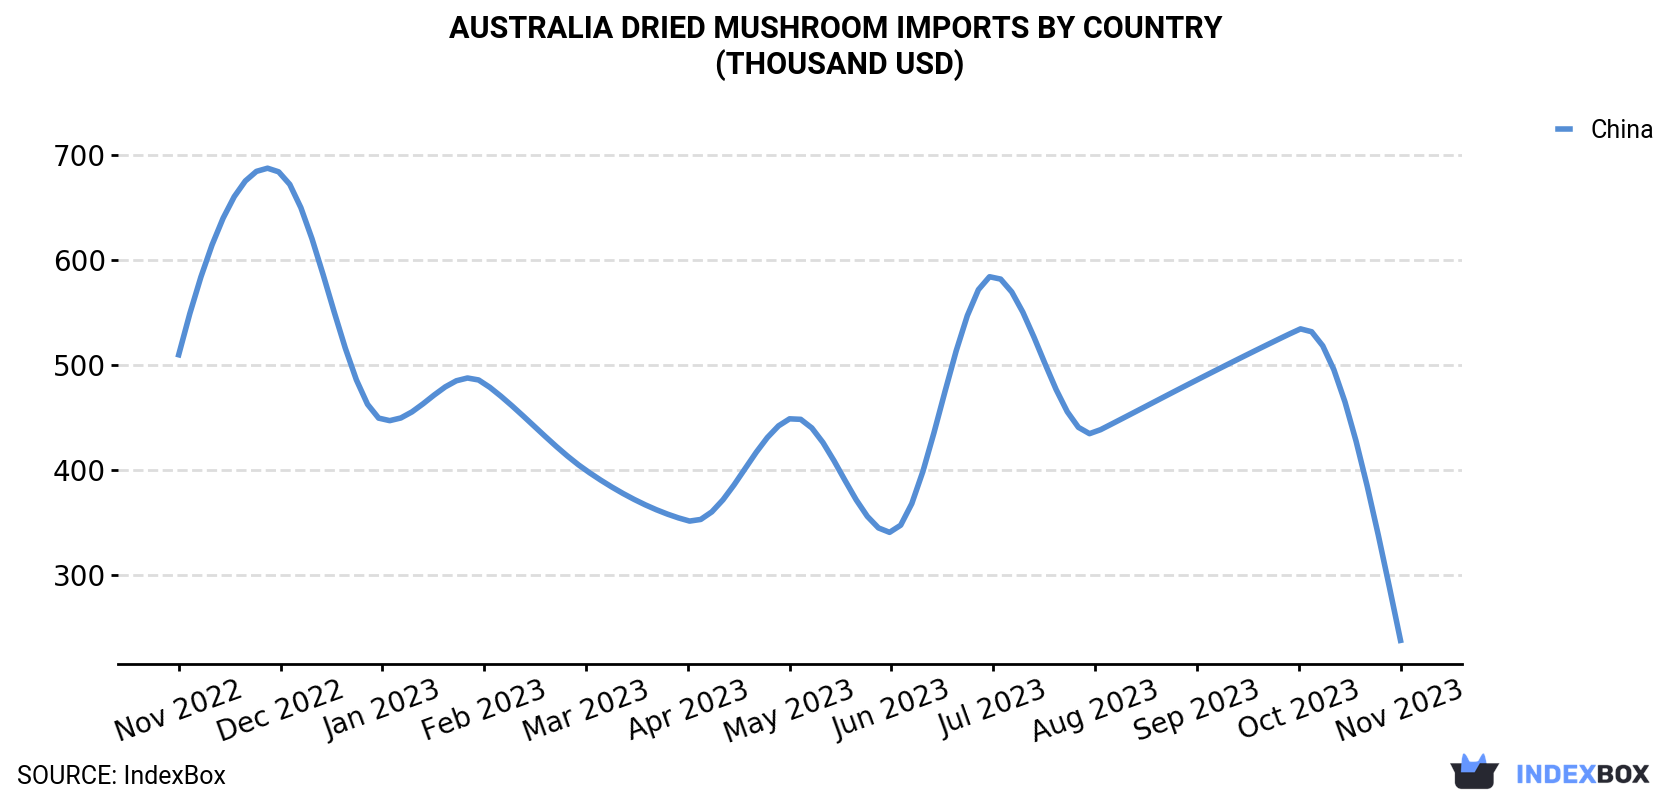 Australia Dried Mushroom Imports By Country (Thousand USD)